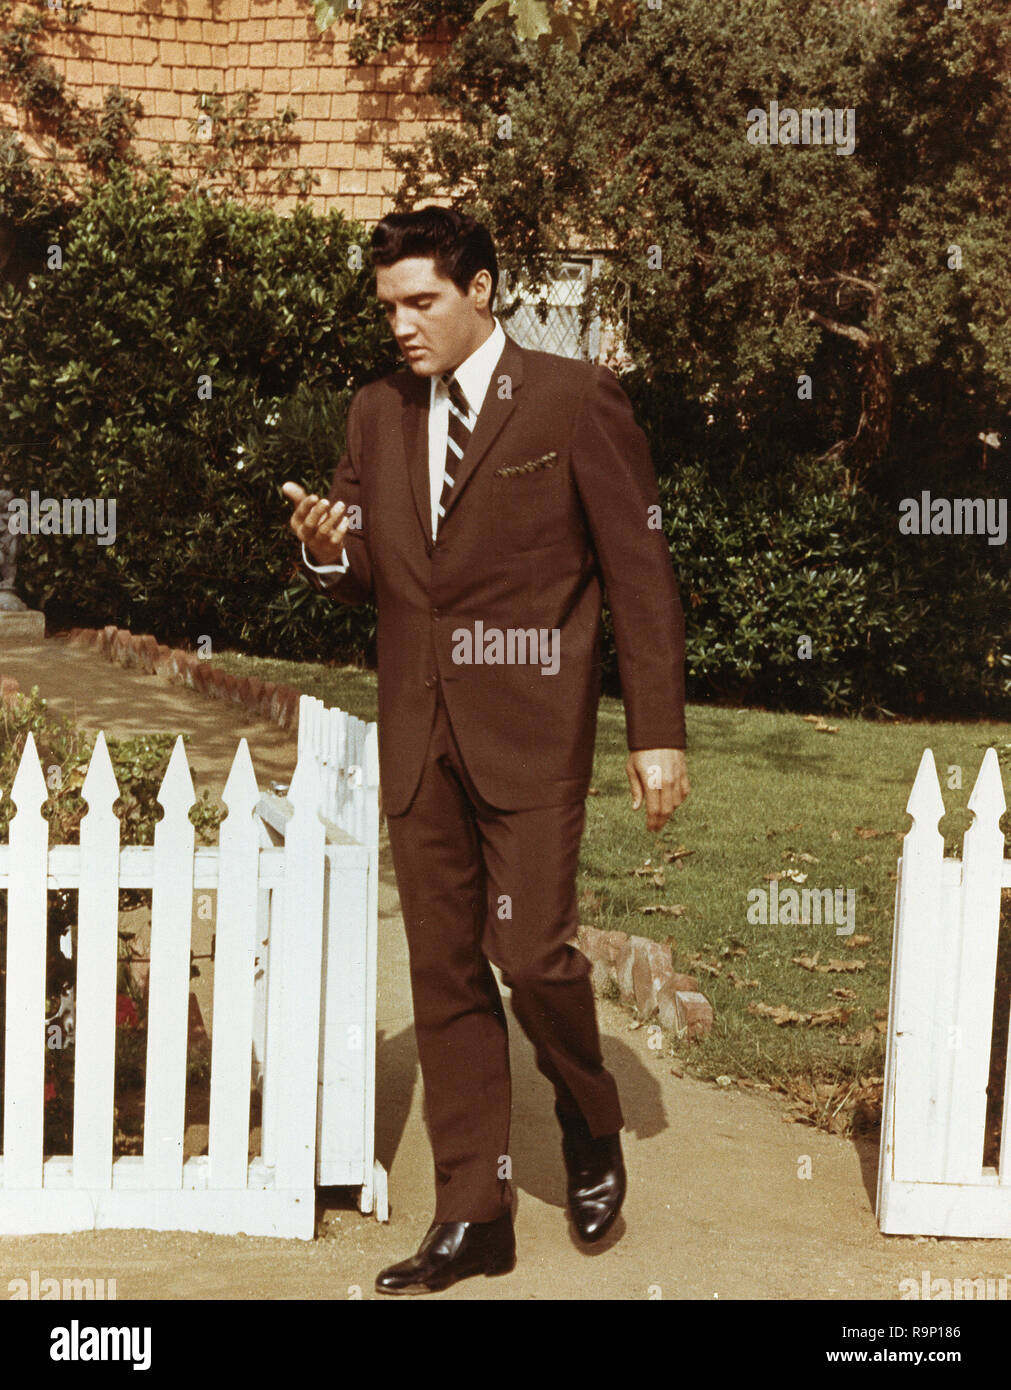 Elvis Presley, wearing brown suit and walking by a picket fence, circa 1964  File Reference # 33635 714THA Stock Photo - Alamy